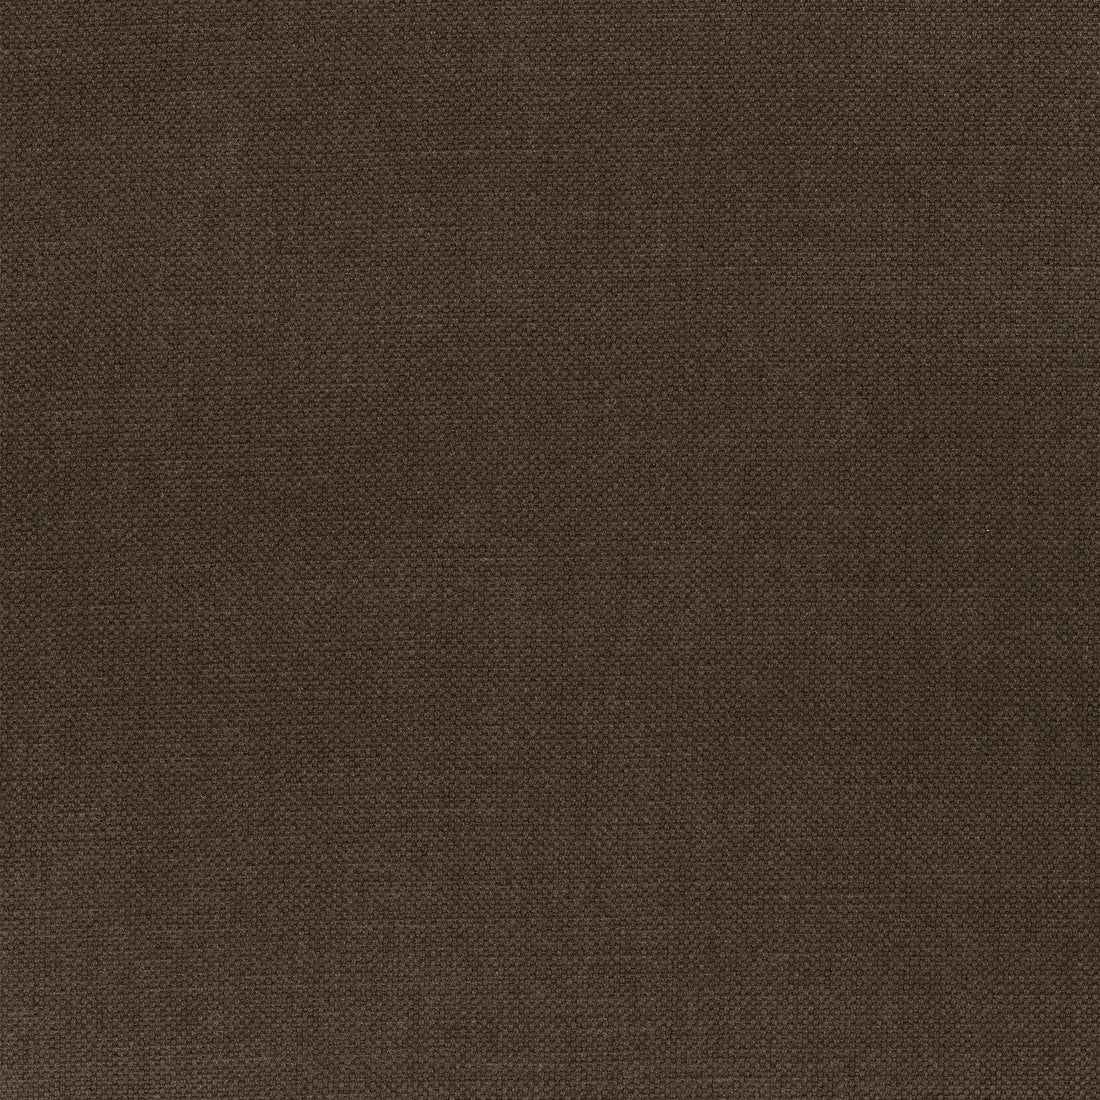 Prisma fabric in chocolate color - pattern number W70110 - by Thibaut in the Woven Resource Vol 12 Prisma Fabrics collection